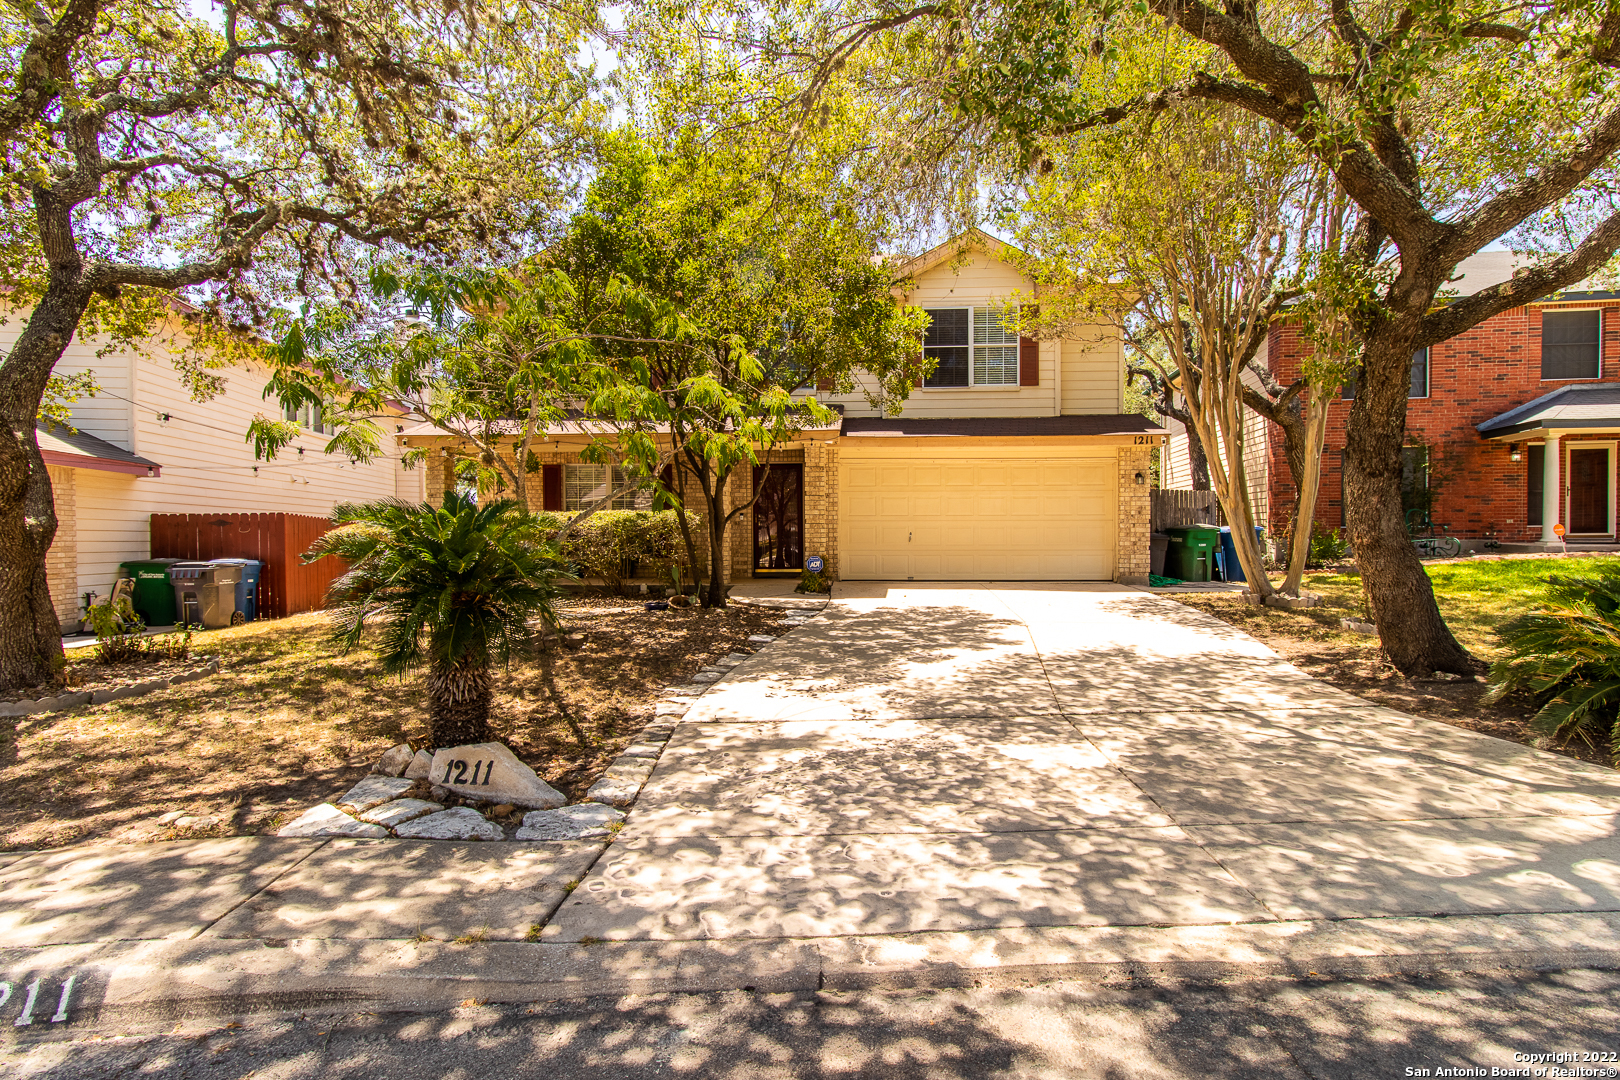 Beautiful and spacious home near Sea World and close to 1604 and 151.  2 living areas, one downstairs and one upstairs.  Lovely backyard with covered patio and mature oak trees.  Well maintained and appointed home.  Master bathroom was recently redone and new floors added upstairs.